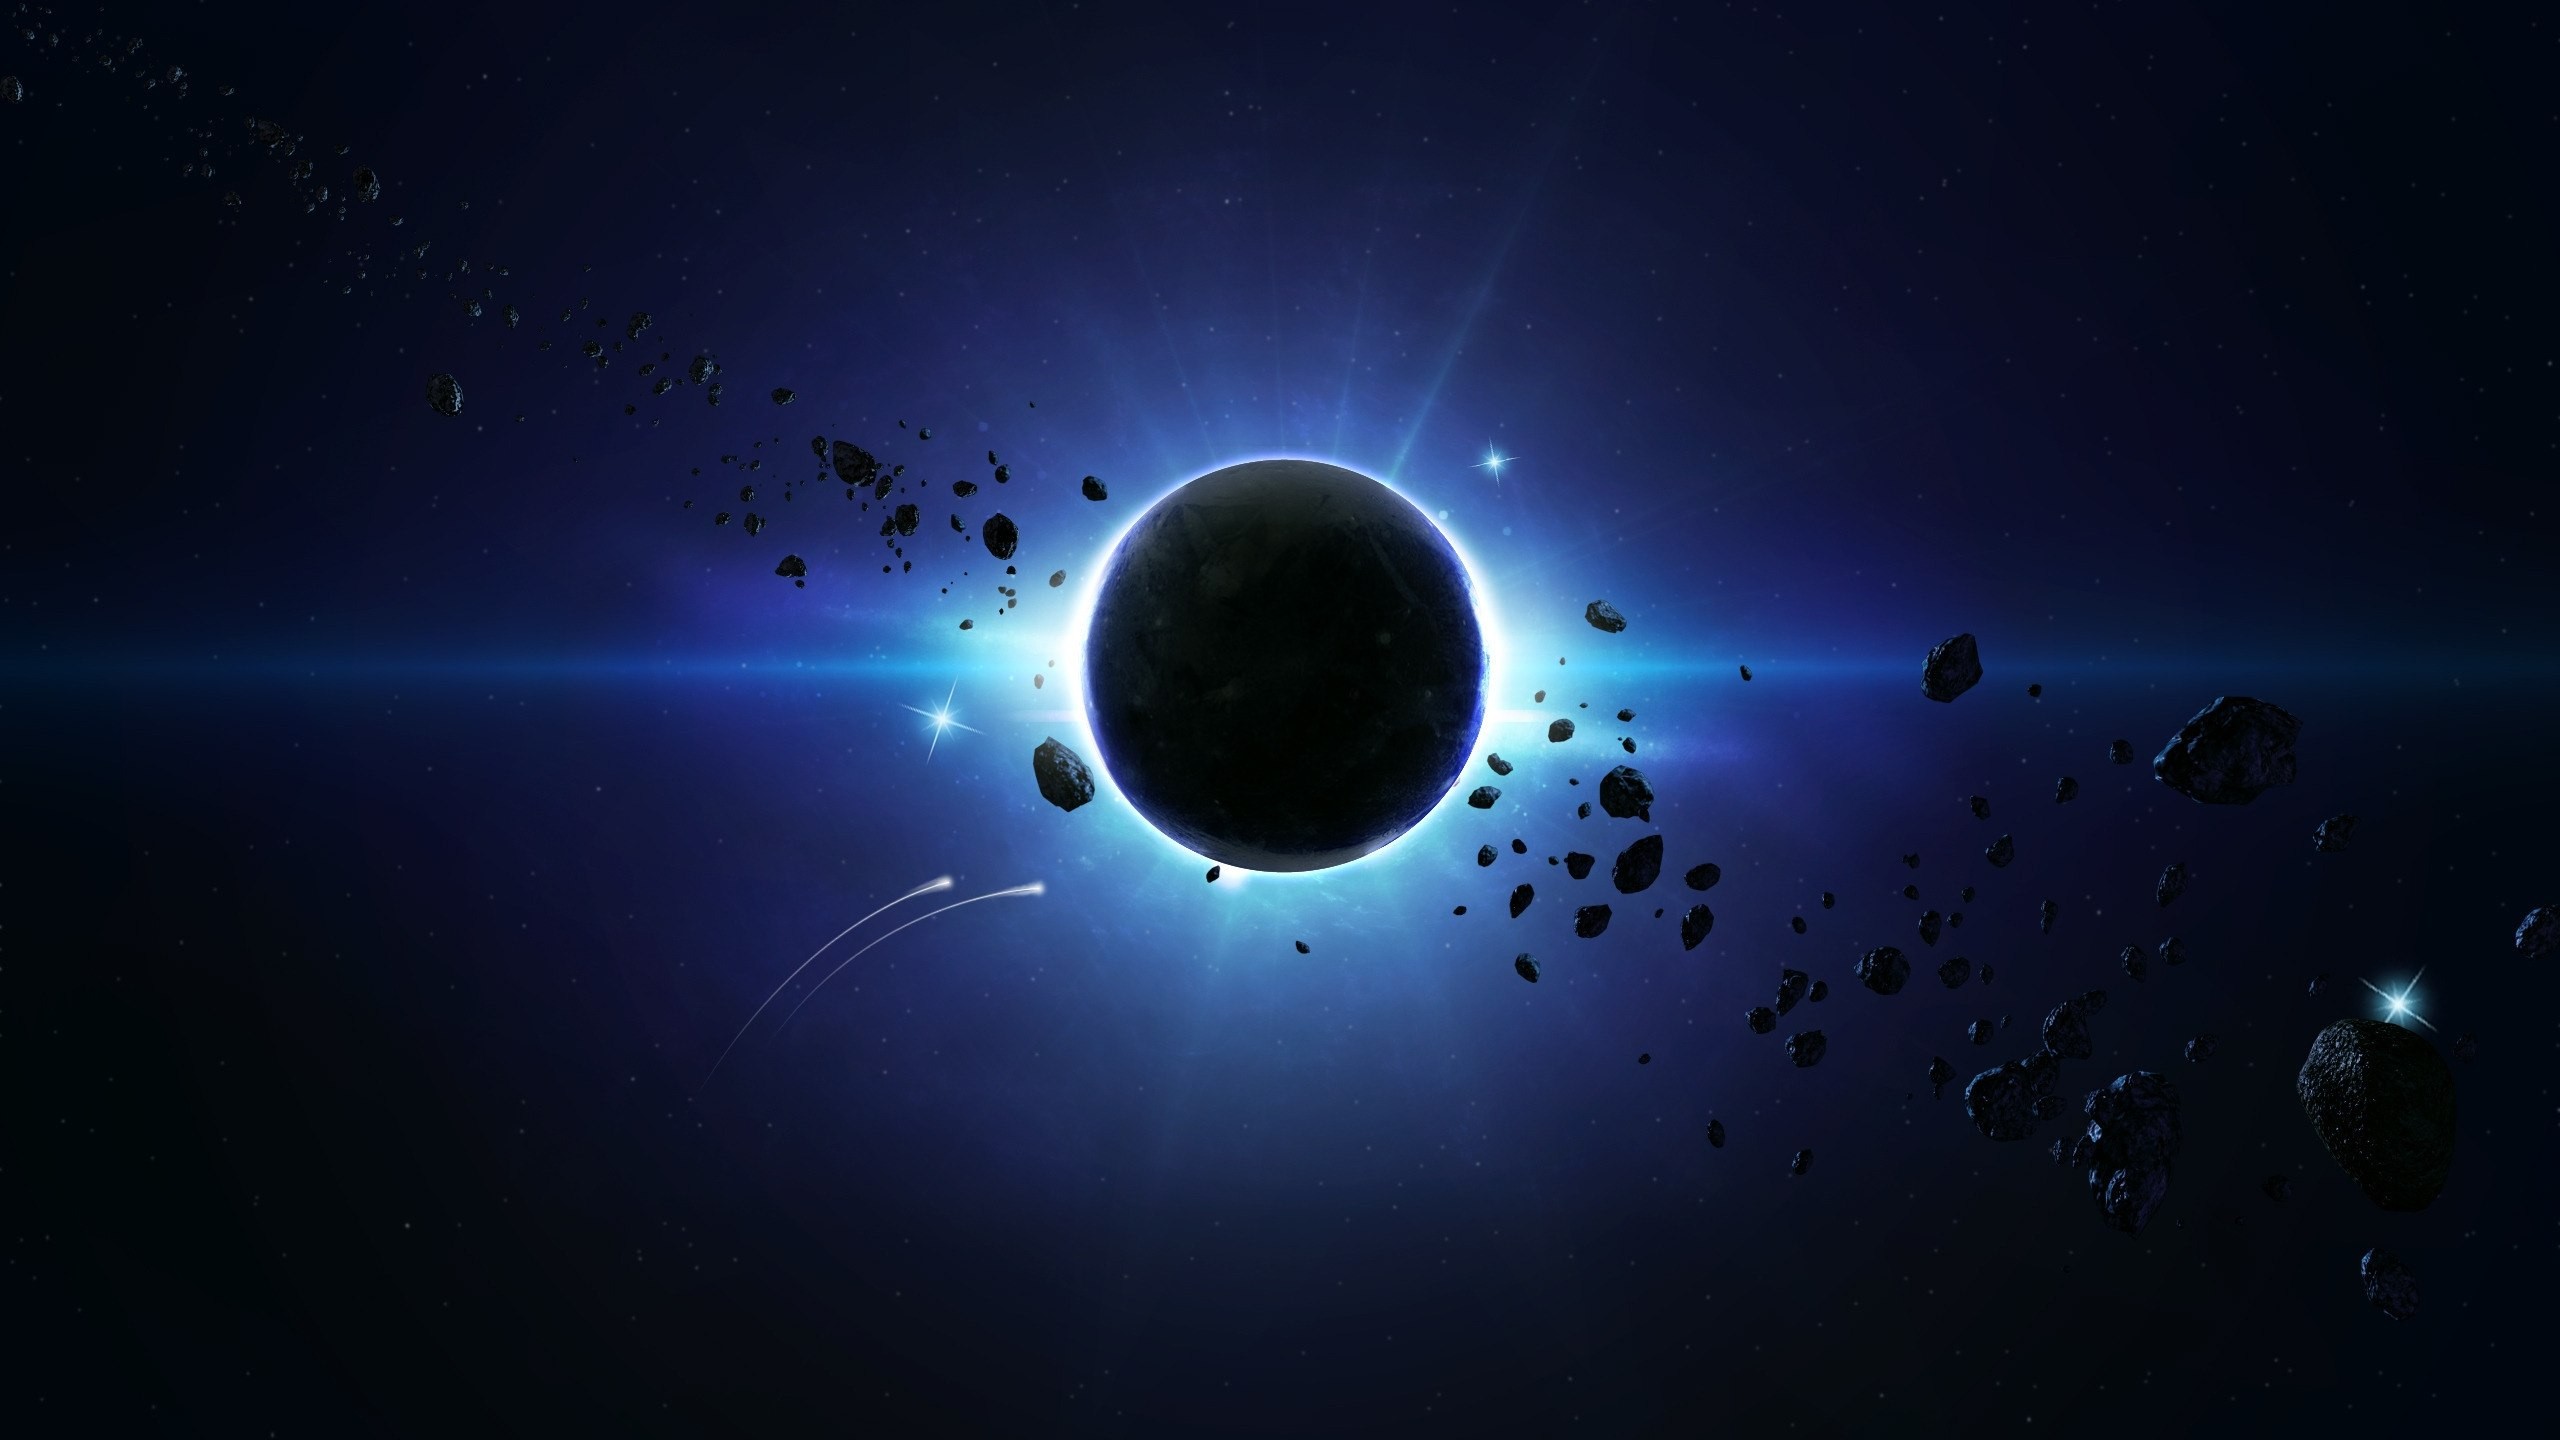 General 2560x1440 solar eclipse planet space asteroid space art digital art simple background stars eclipse 